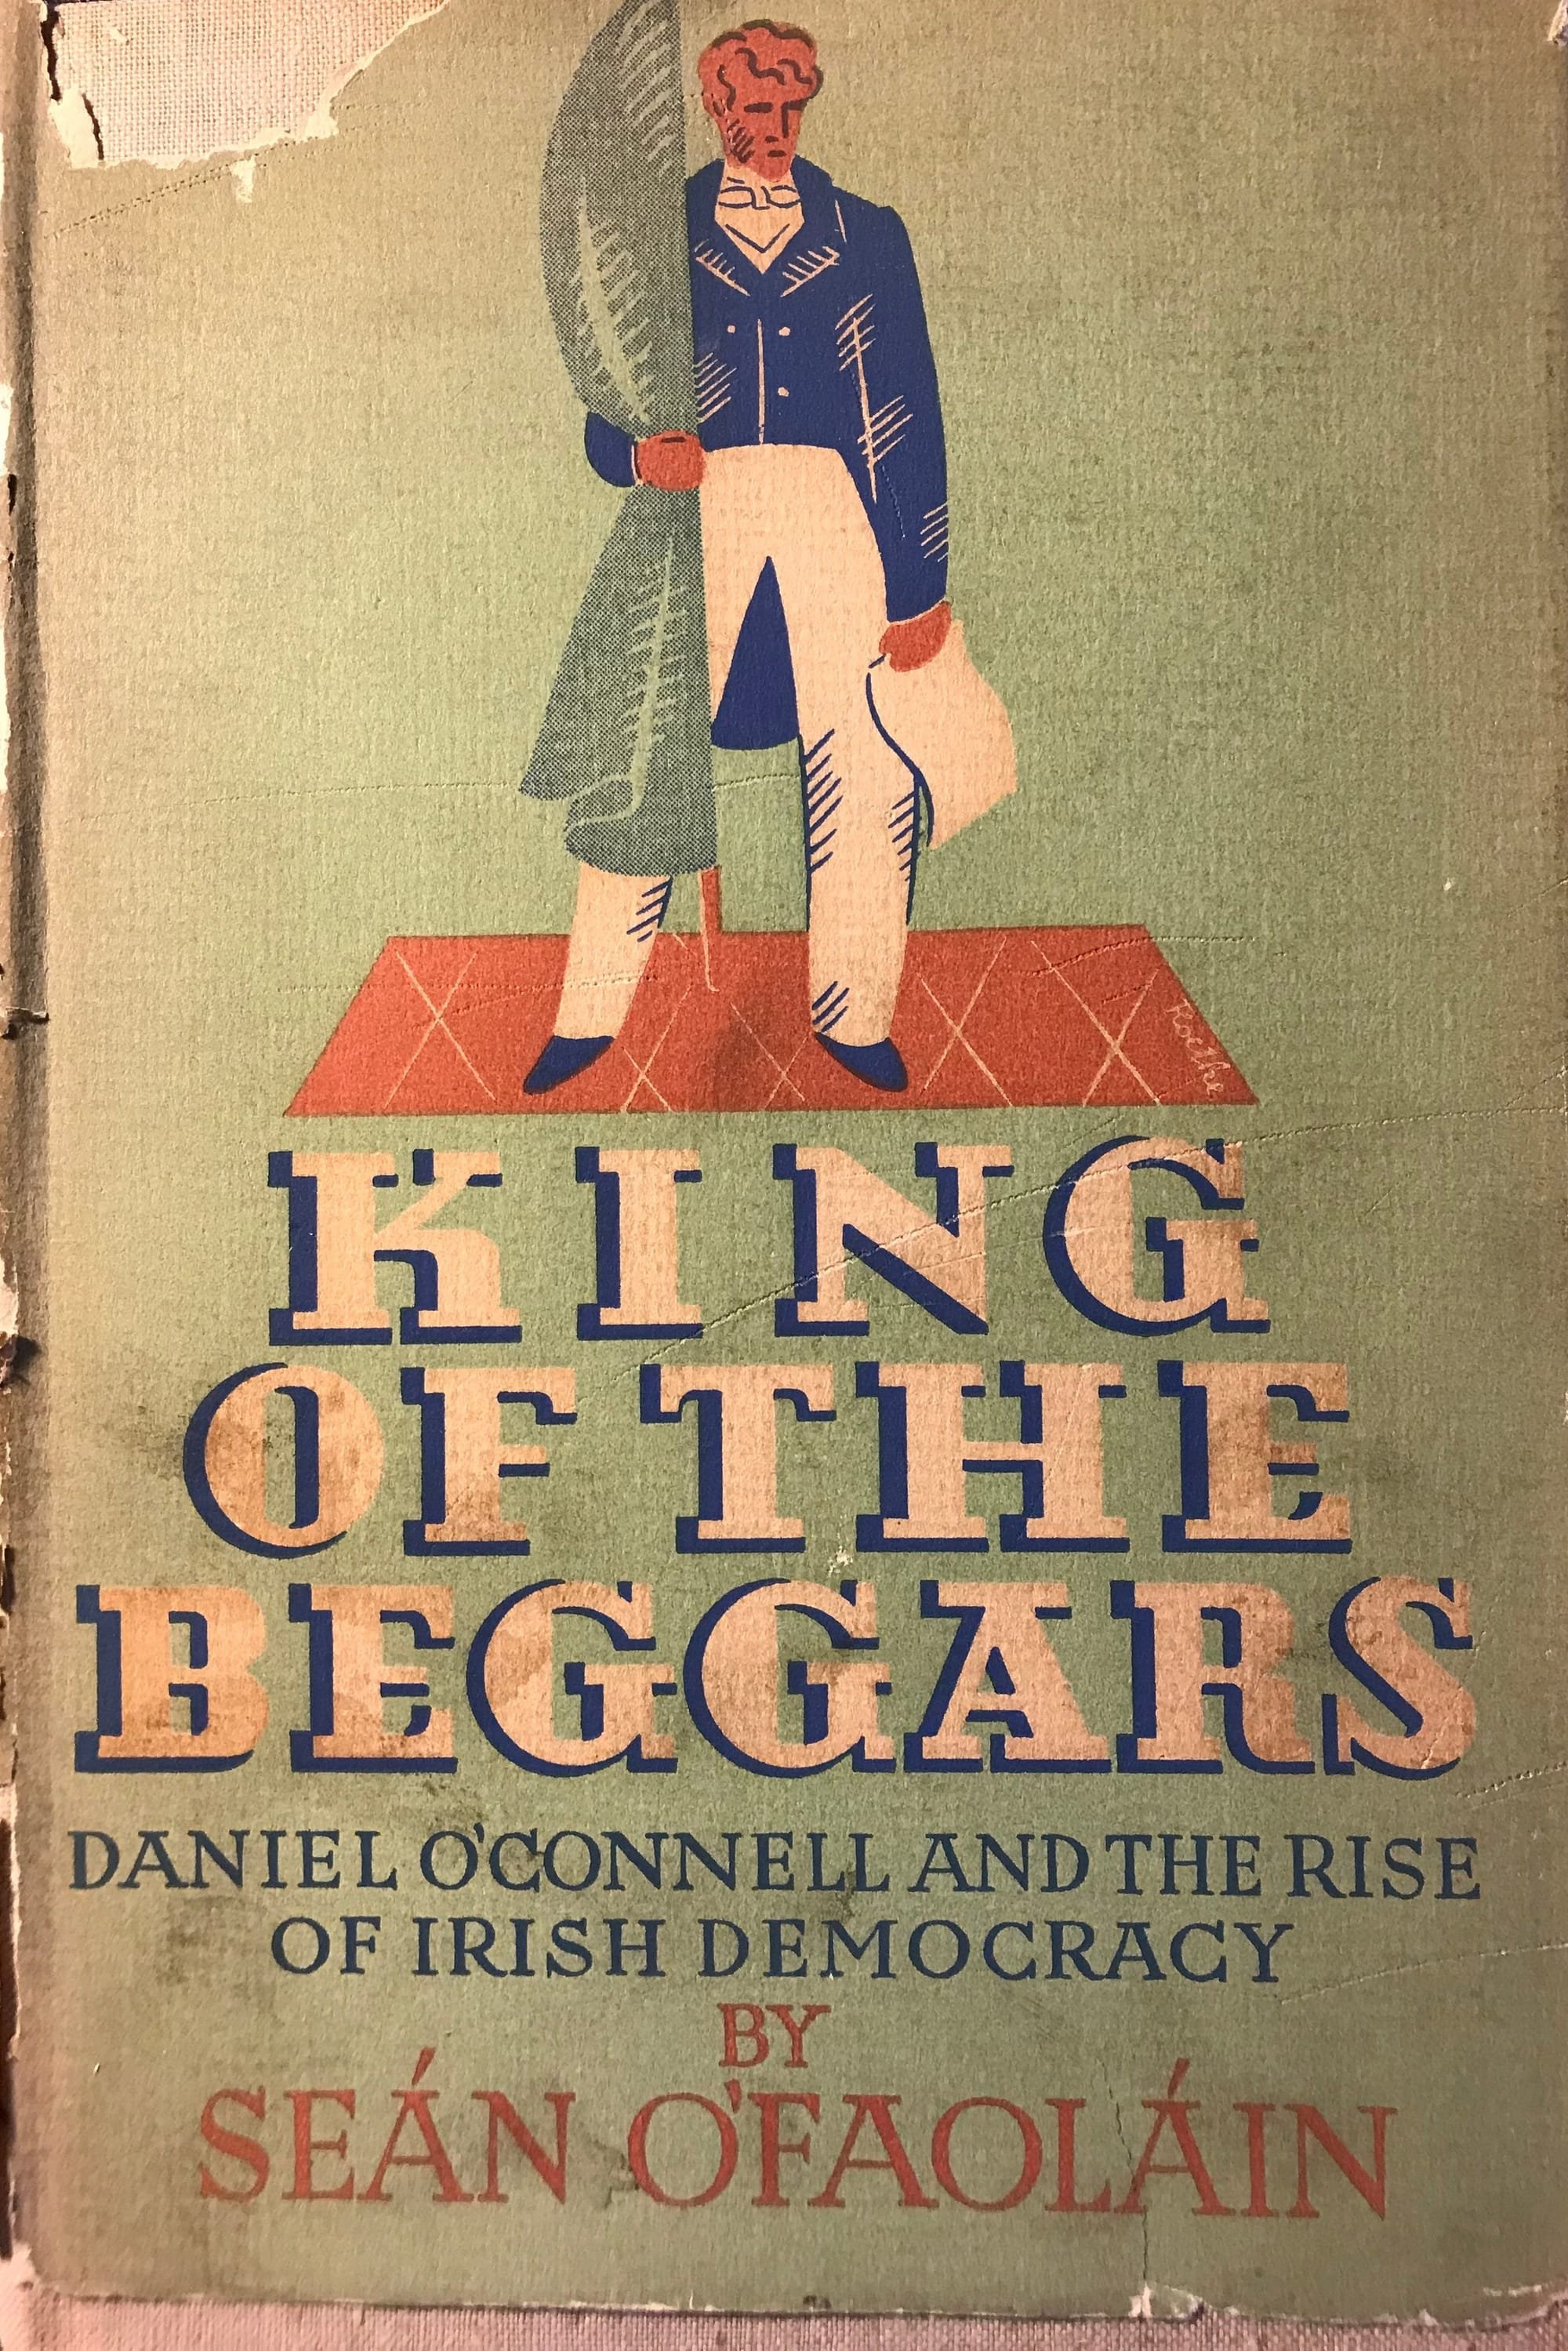 King of the Beggars, Daniel O’Connell and the Rise of Irish Democracy